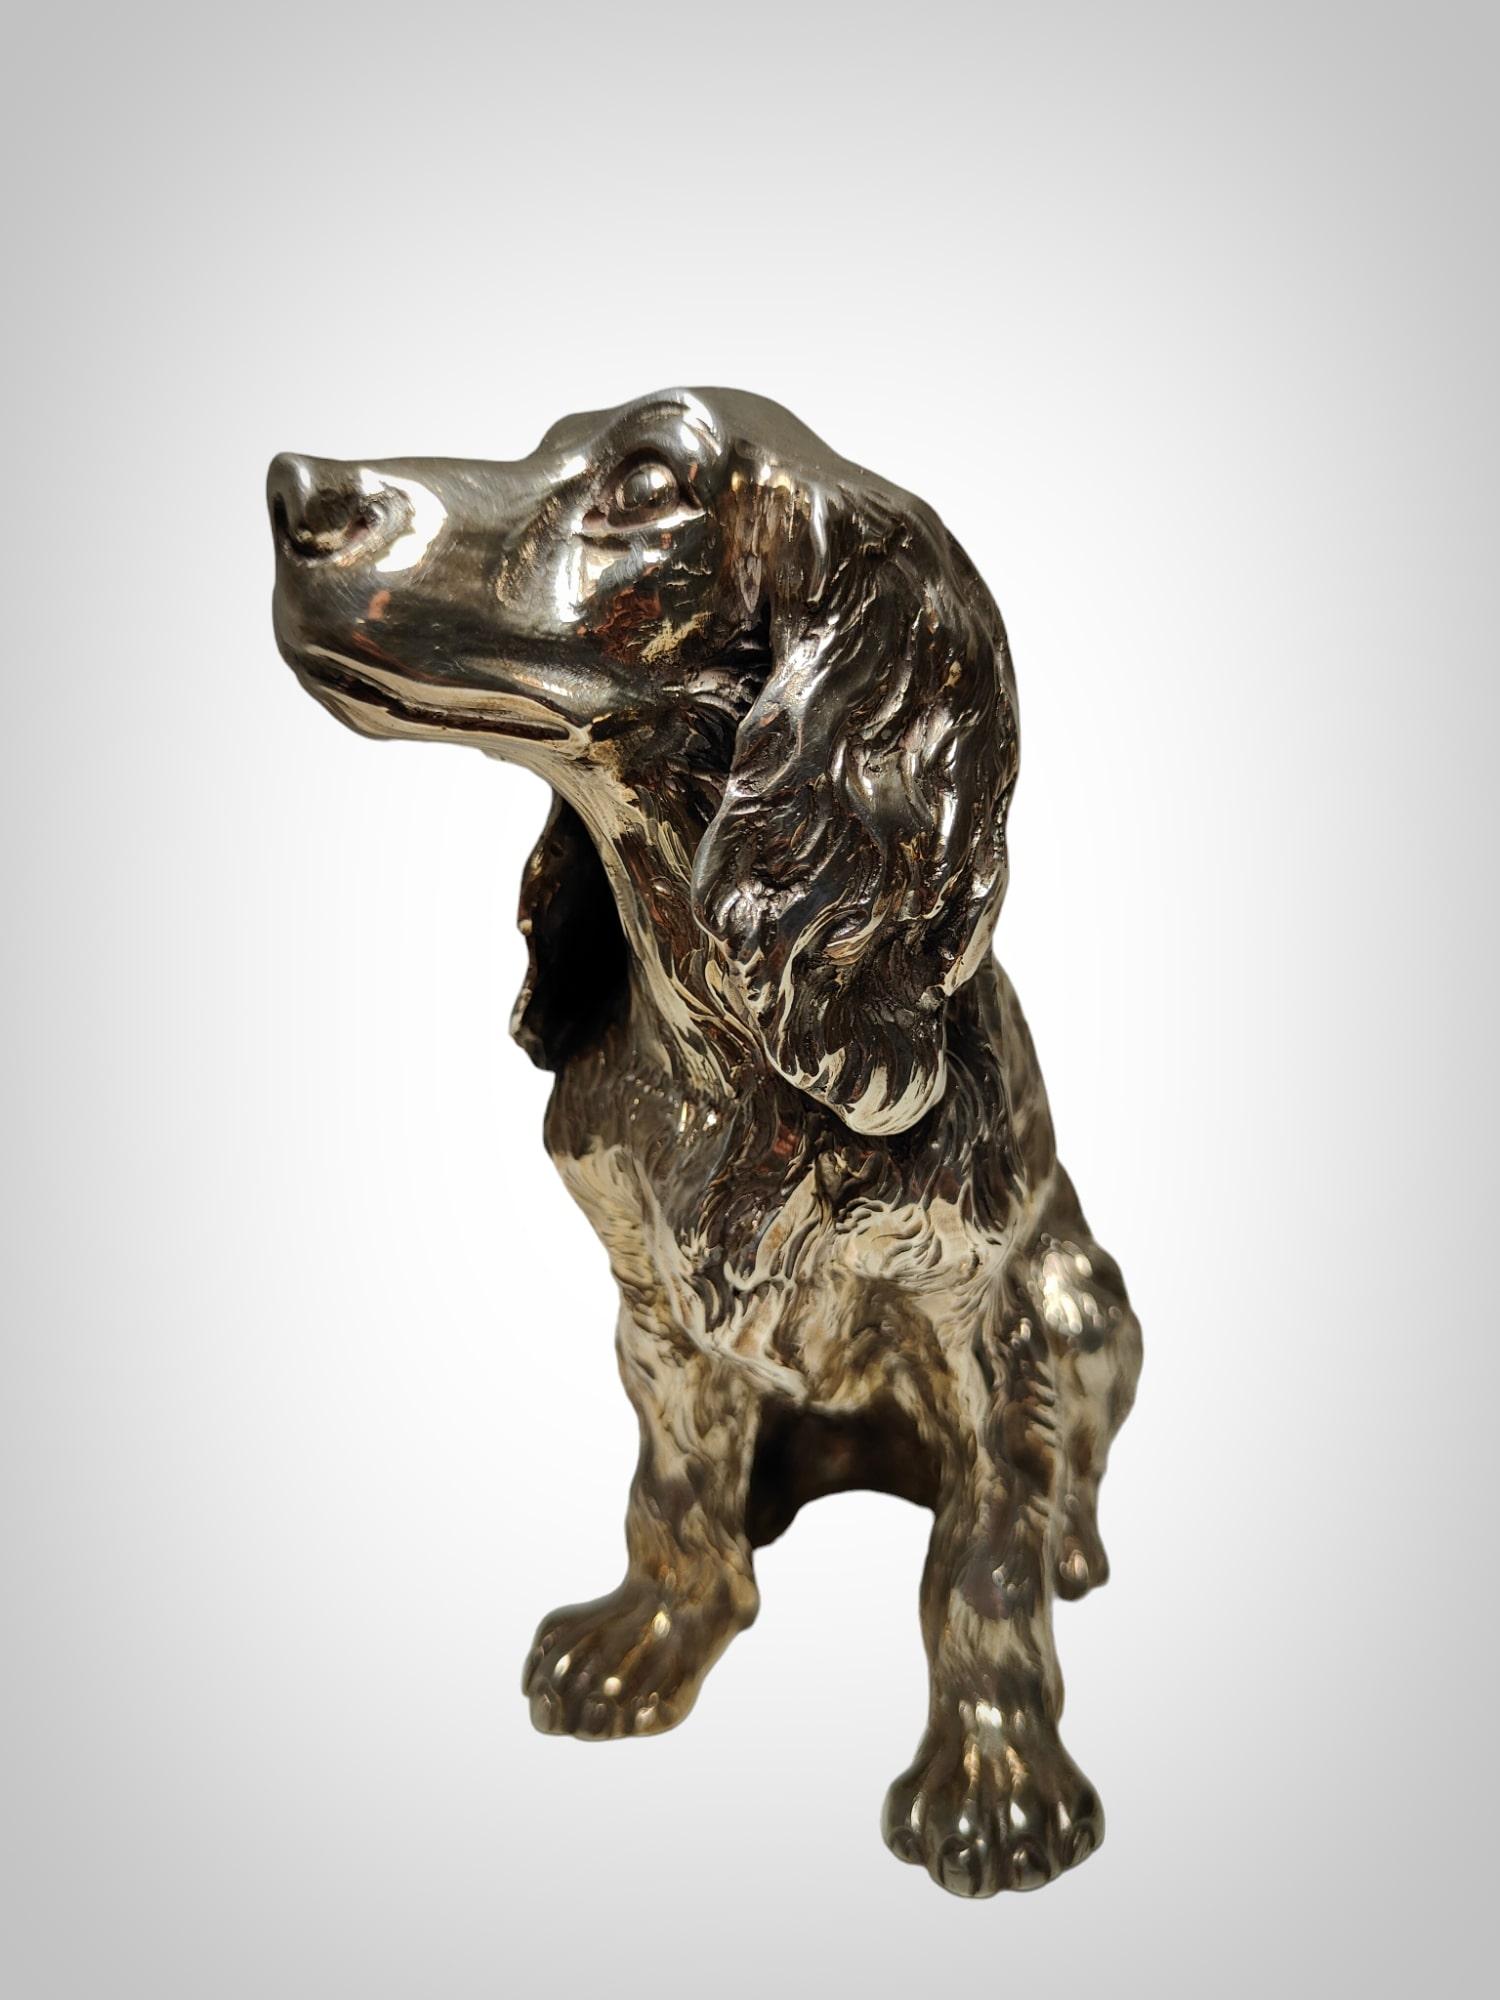 Exquisite Pair of Italian Solid Silver Cocker Spaniel Dogs For Sale 3